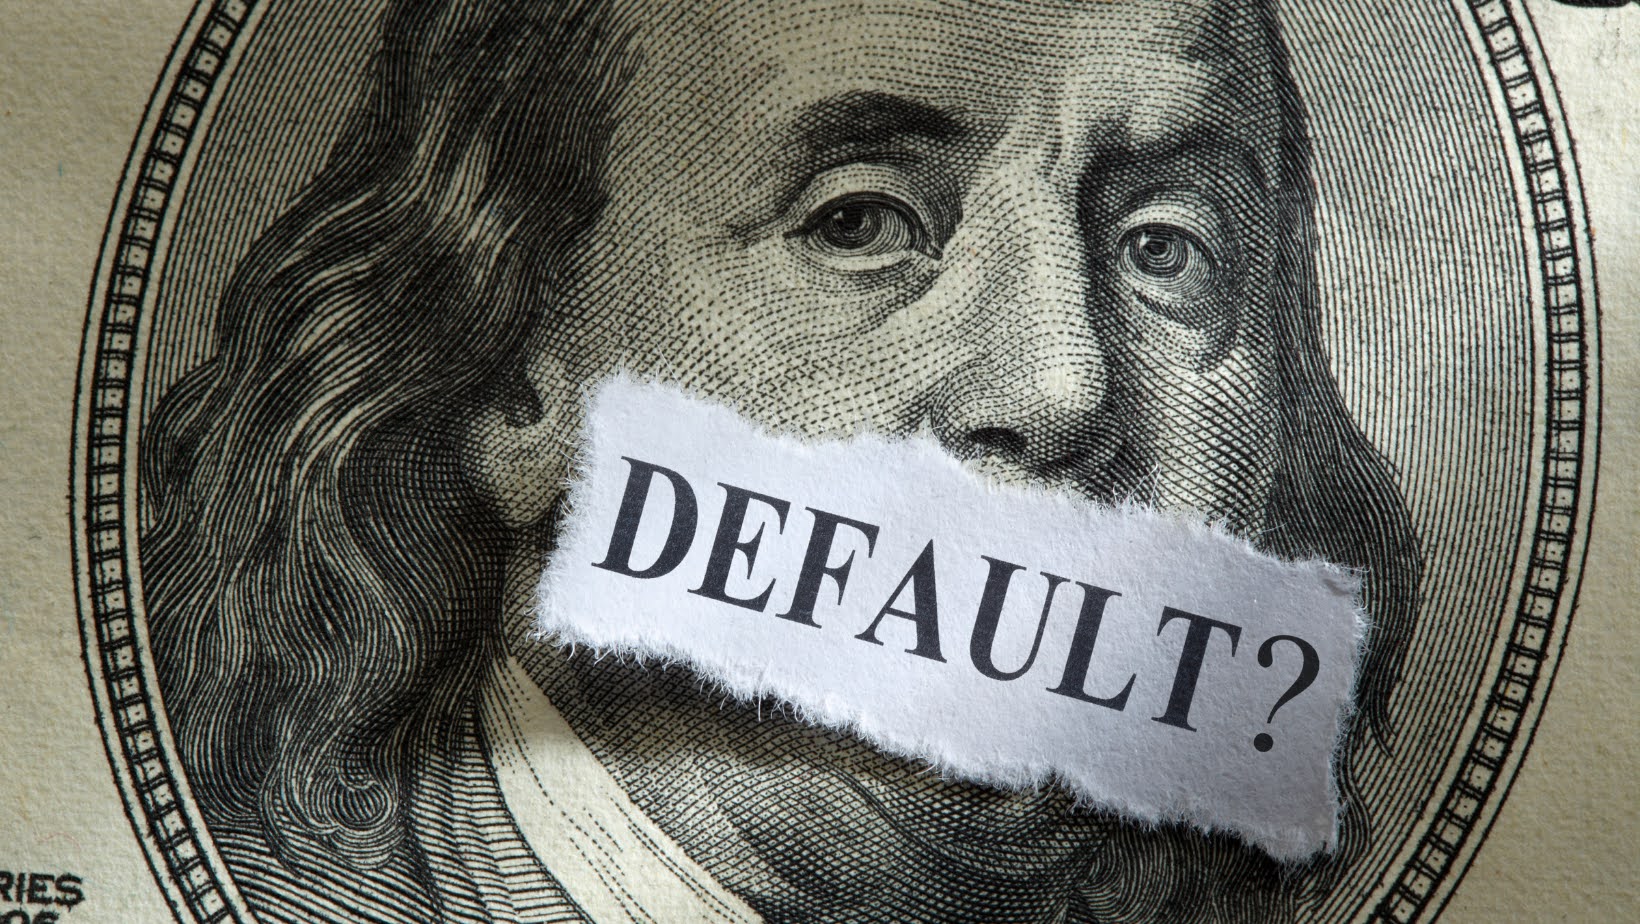 Understand the potential impact of an American default on the global economy, credit ratings, financial markets, and political stability. Explore strategies to prepare for uncertainty, including diversifying investments, managing debt responsibly, building an emergency fund, and seeking professional advice.